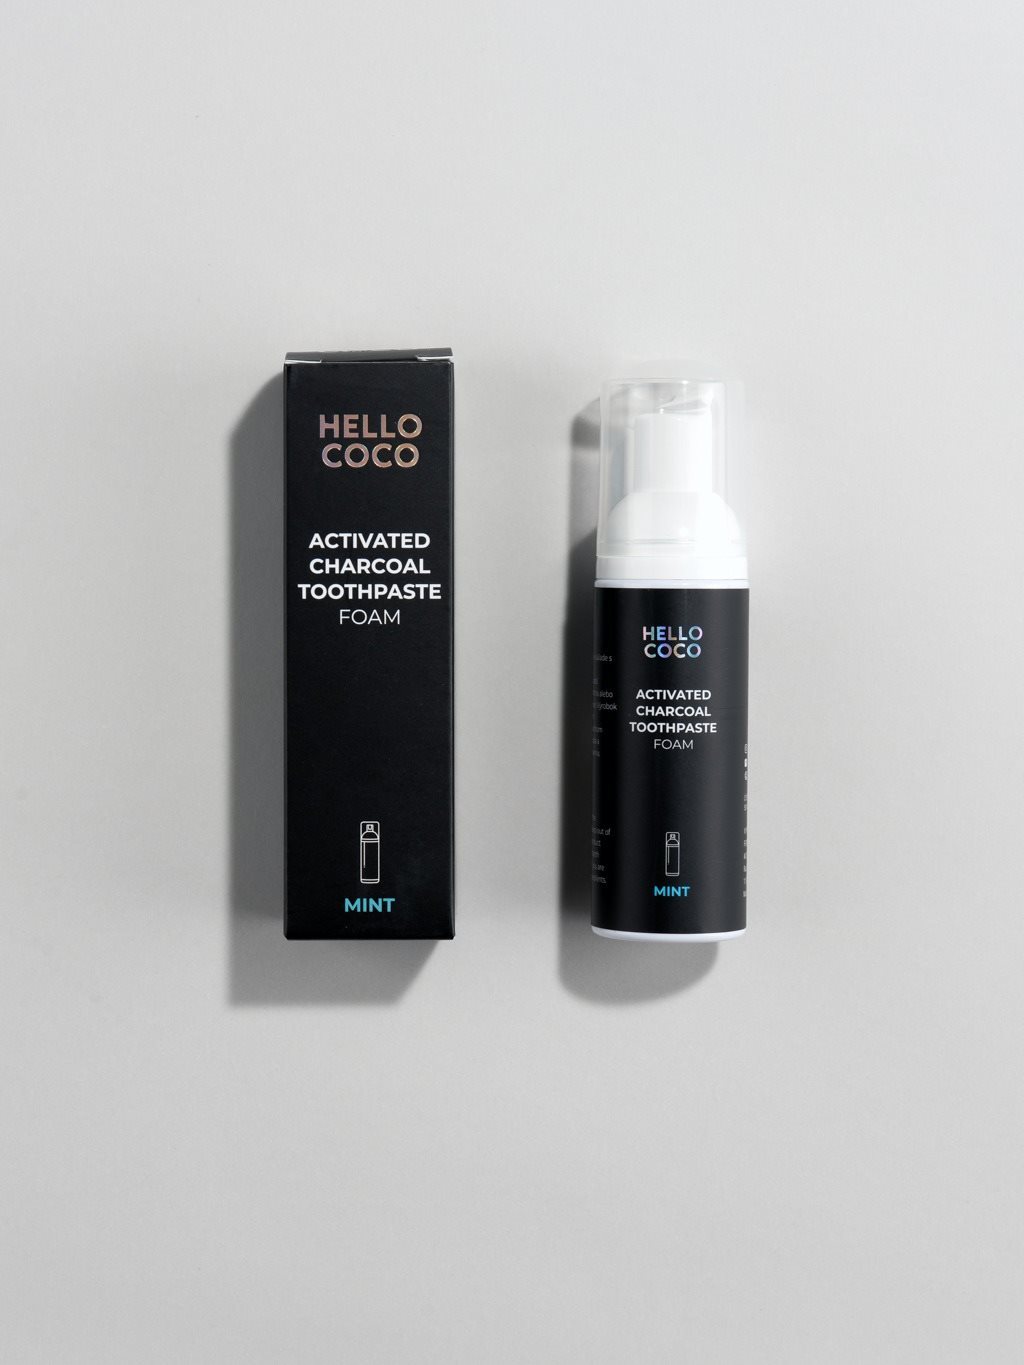 HELLO COCO Activated Charcoal Toothpaste foam 50 ml